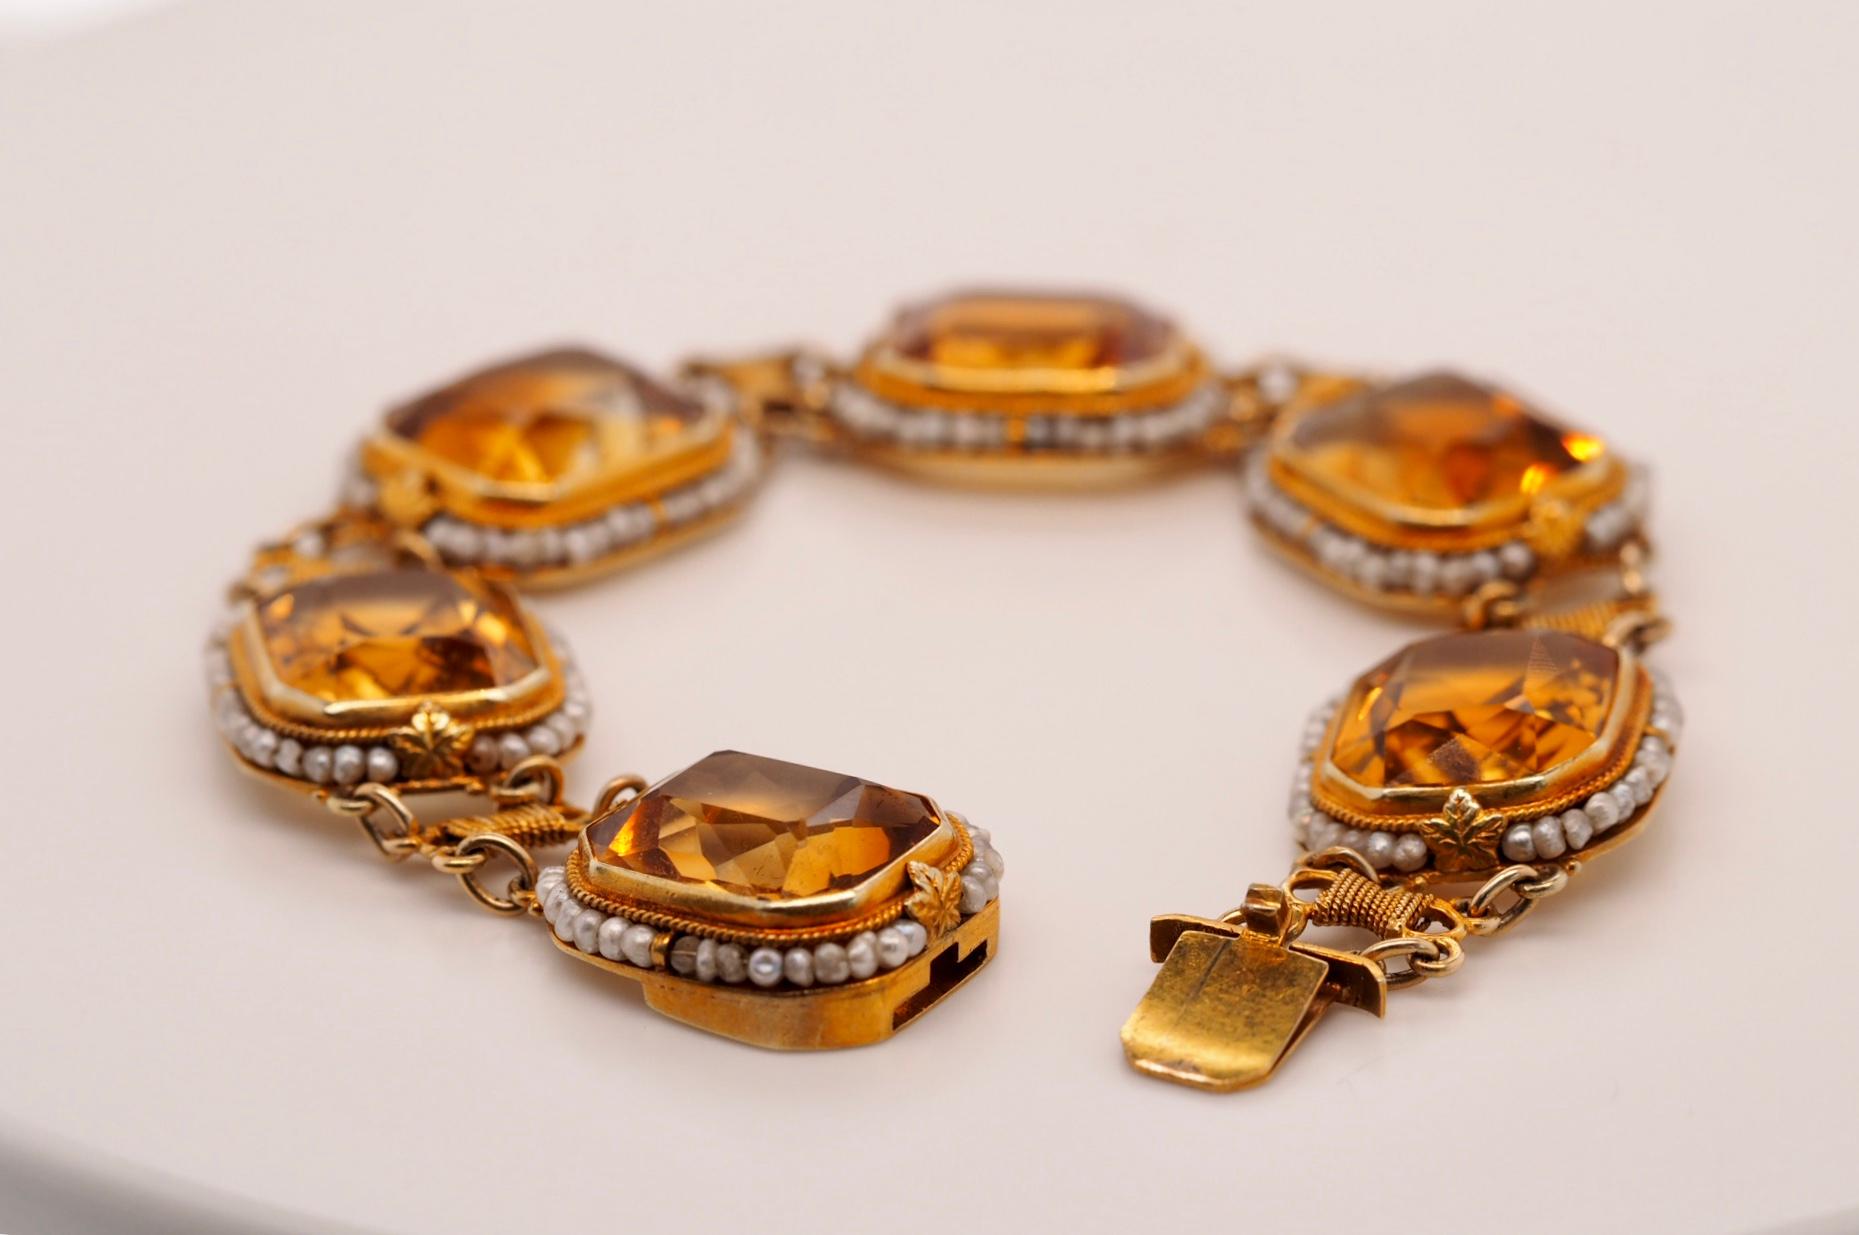 Vintage 14 Karat Yellow Gold  46.62 Carat total weight Citrine Bracelet includes six individually bezel set citrines measuring 14mm x 7mm approximately 7.77 Carats each.  Each stone is surrounded with beautiful detailed wire of pearls average 1 mm